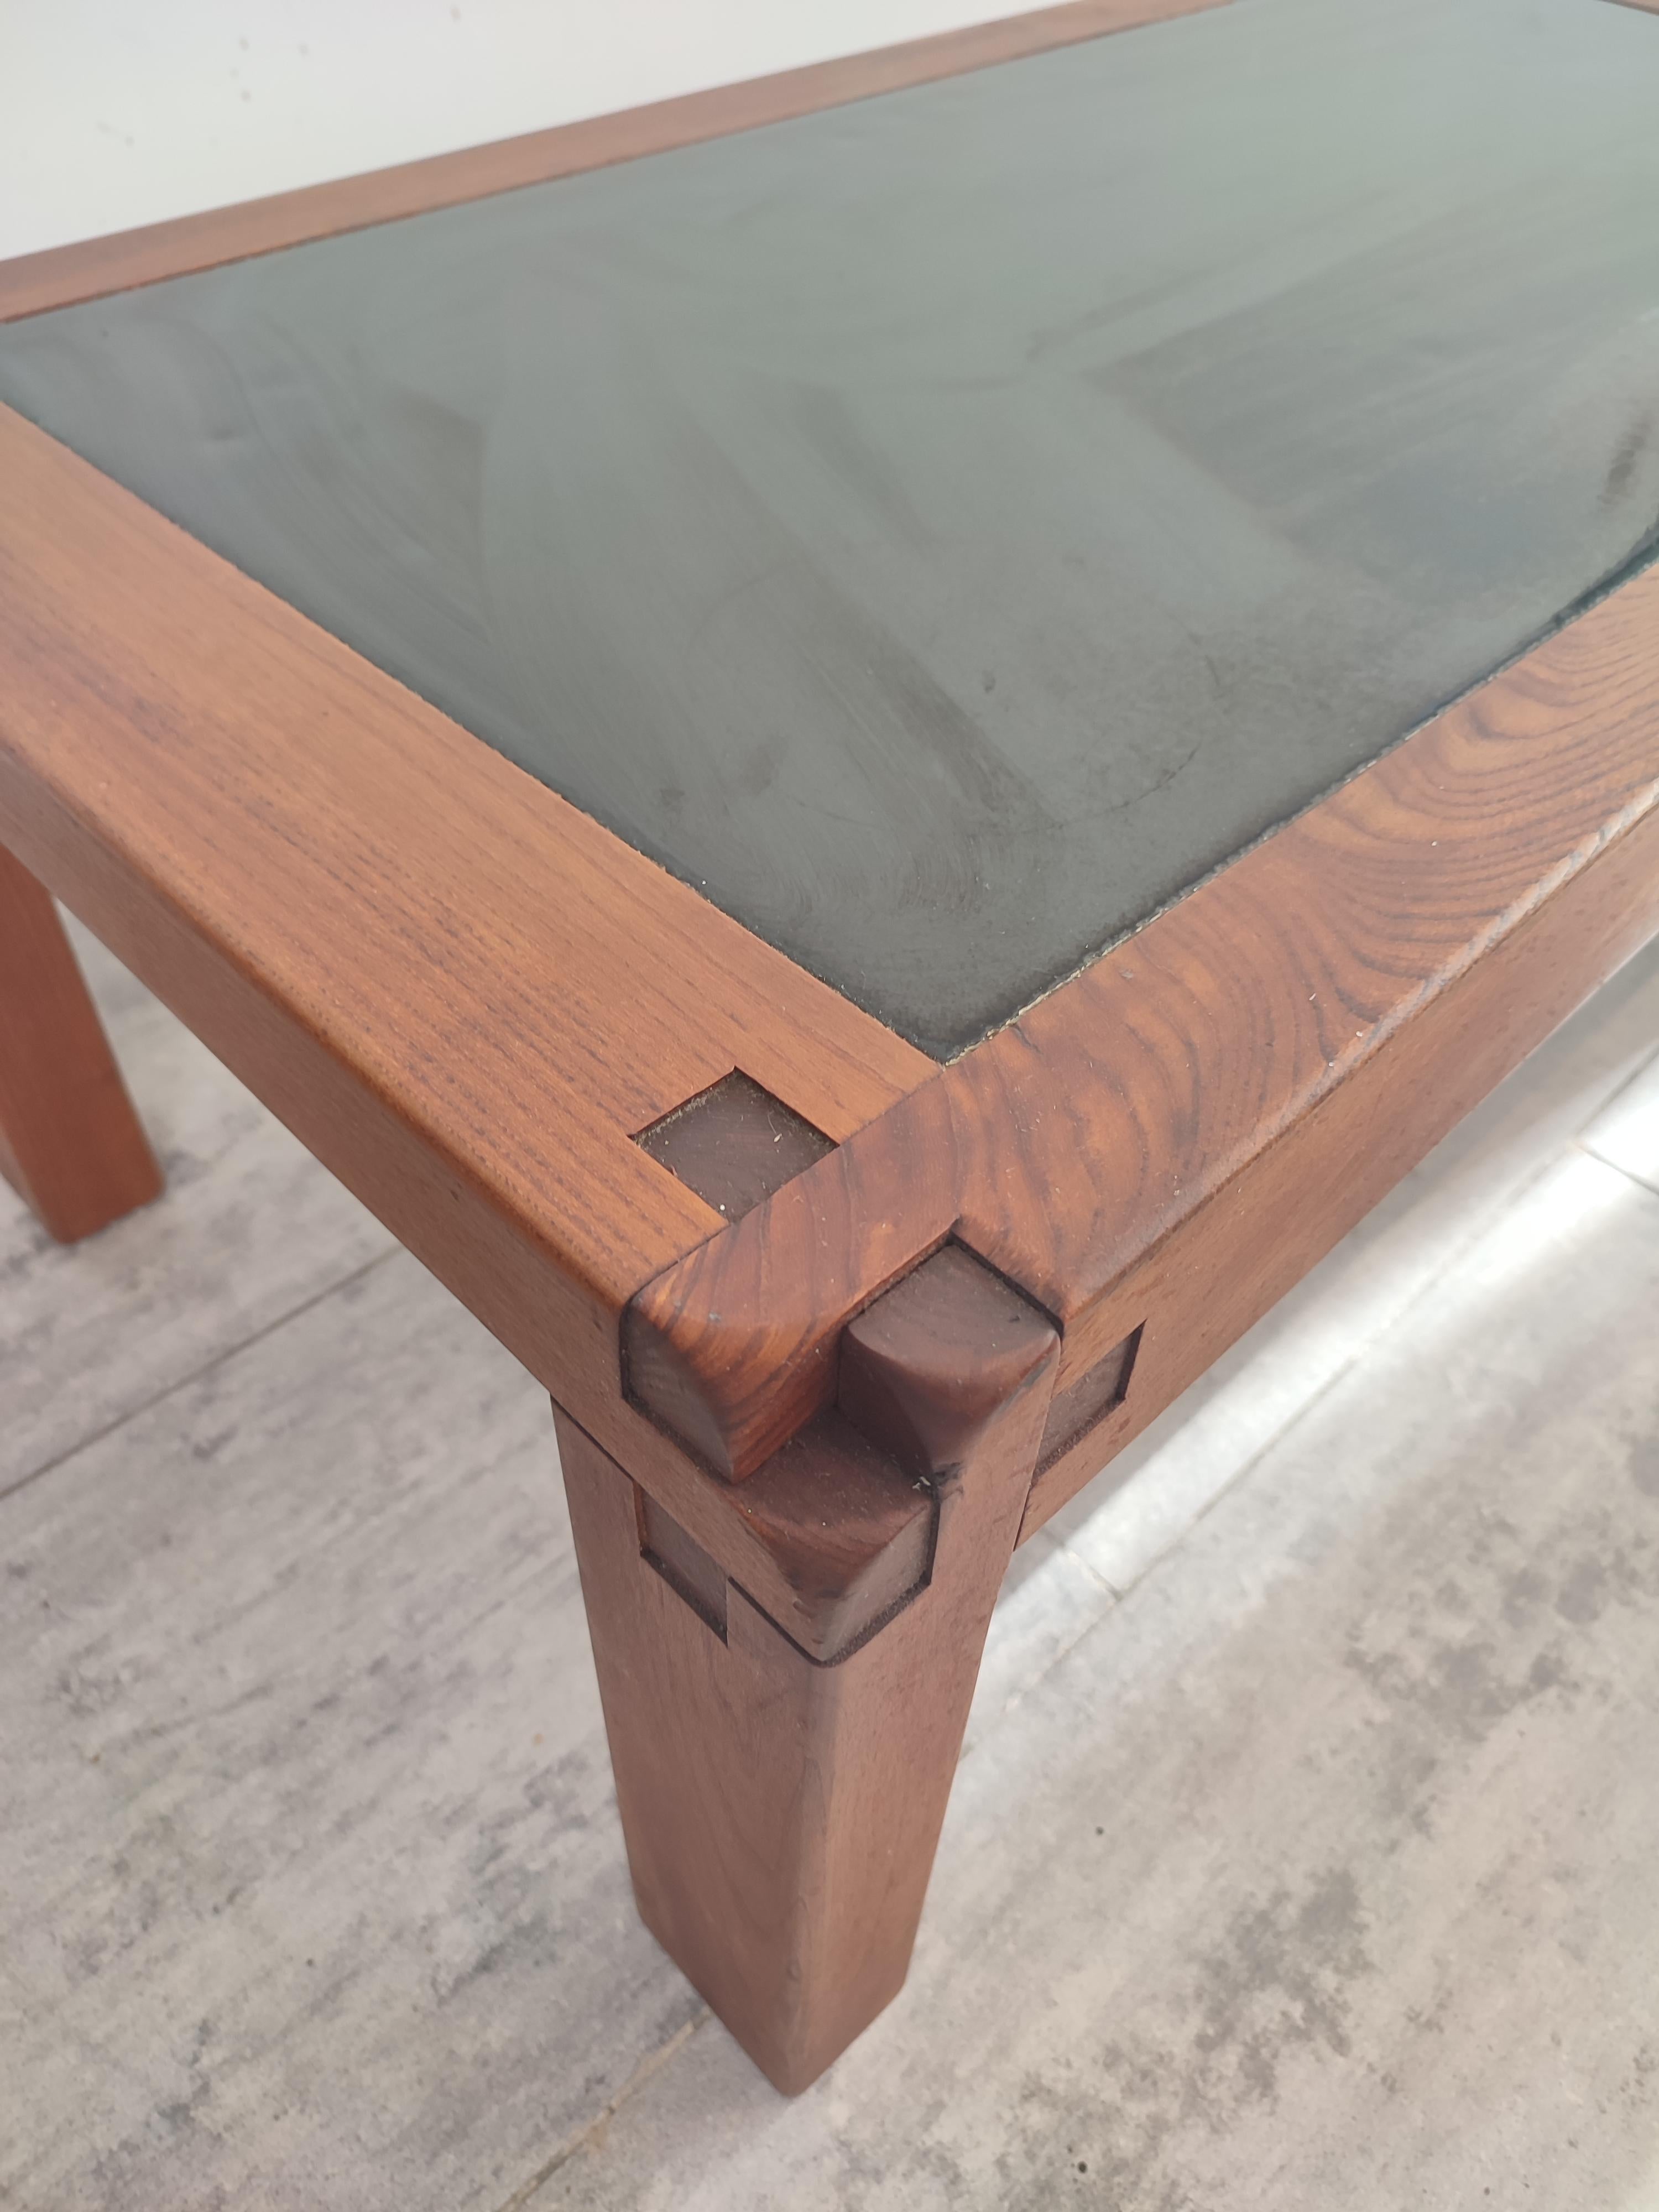 French Coffee Table, Pierre Chapo, T-18 with Elmwood Frame and Visible Wood-Joints